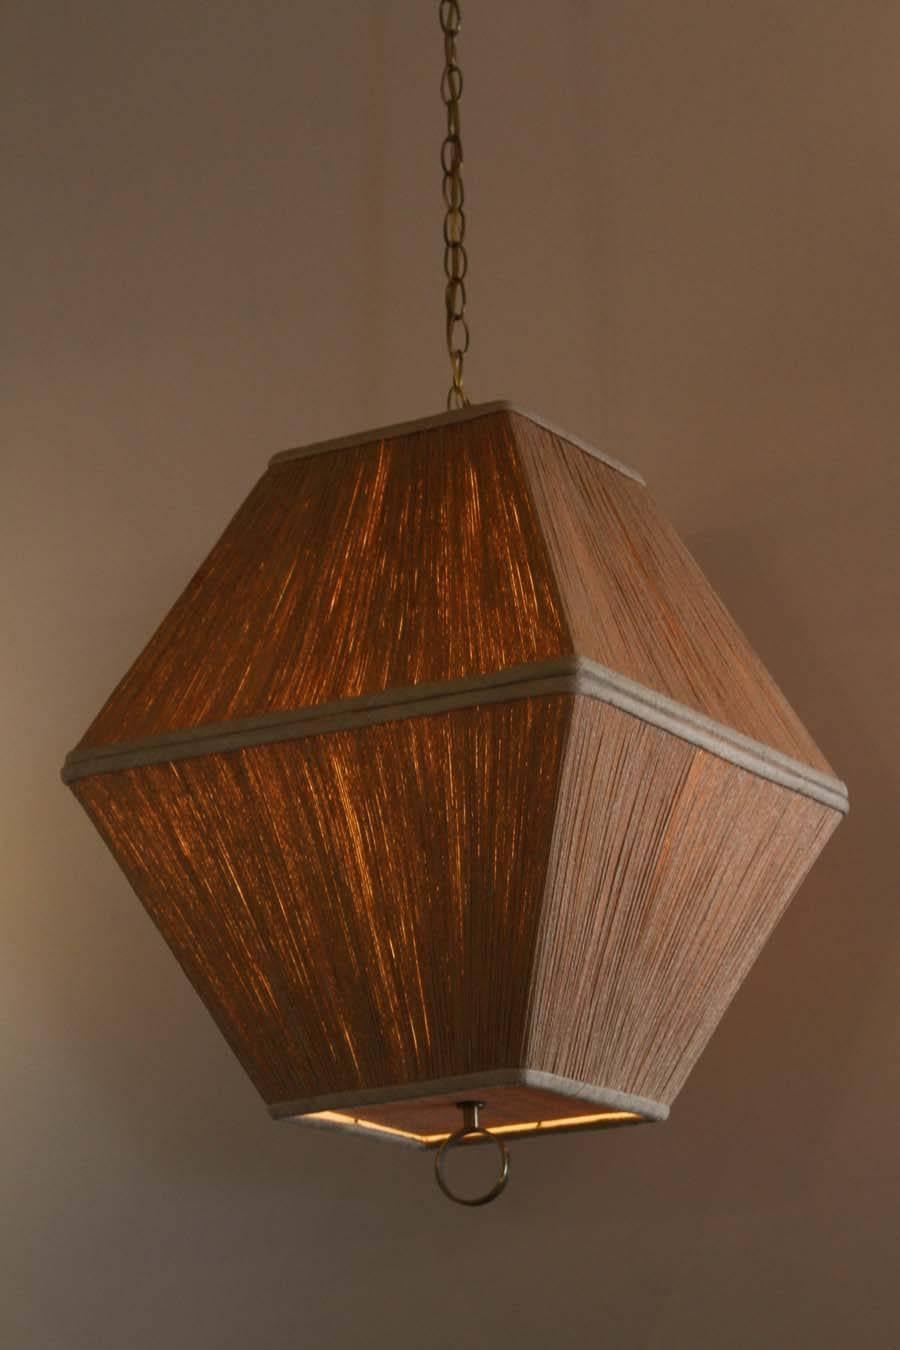 Vintage string shaded lantern style chandelier - pendant. New electrical and brass hardware.